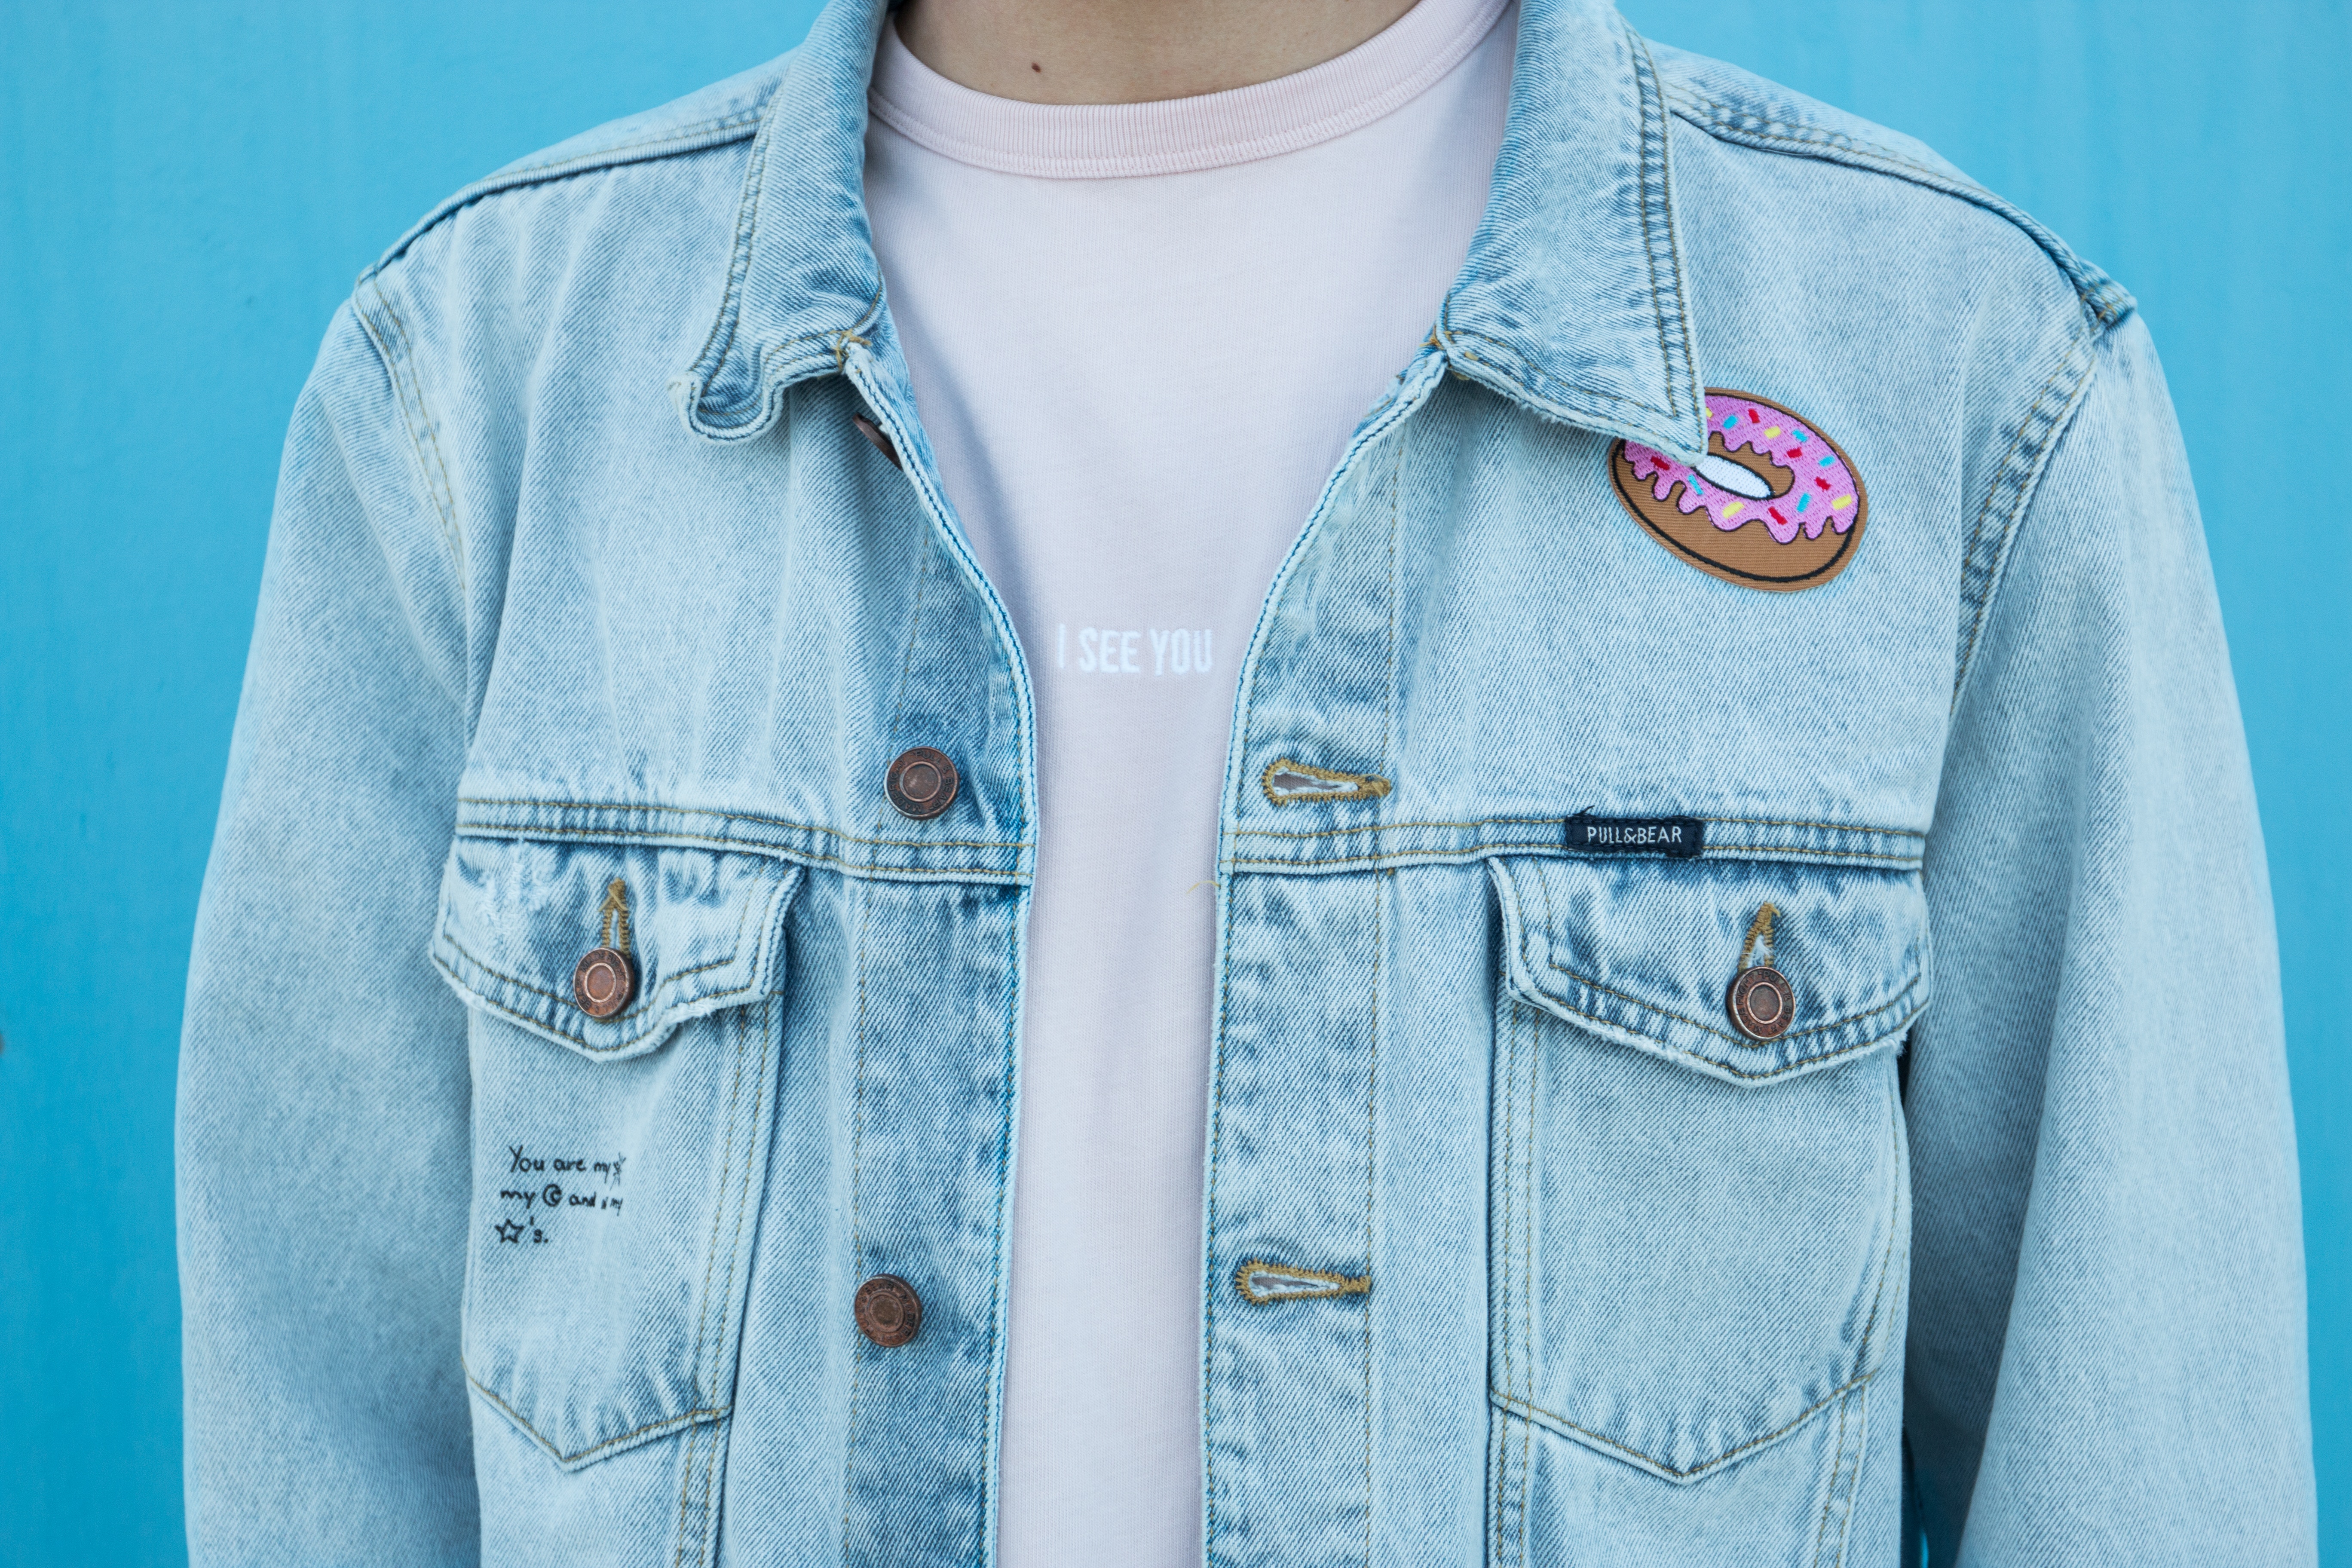 5472x3648 pull&bear, man, hipster, minimal, funny background, Public domain image, denim, model, patch, brand, clothing, funny wallpaper, food, ad, jean jacket, donut, blue, modern, person, fashion, wallpaper